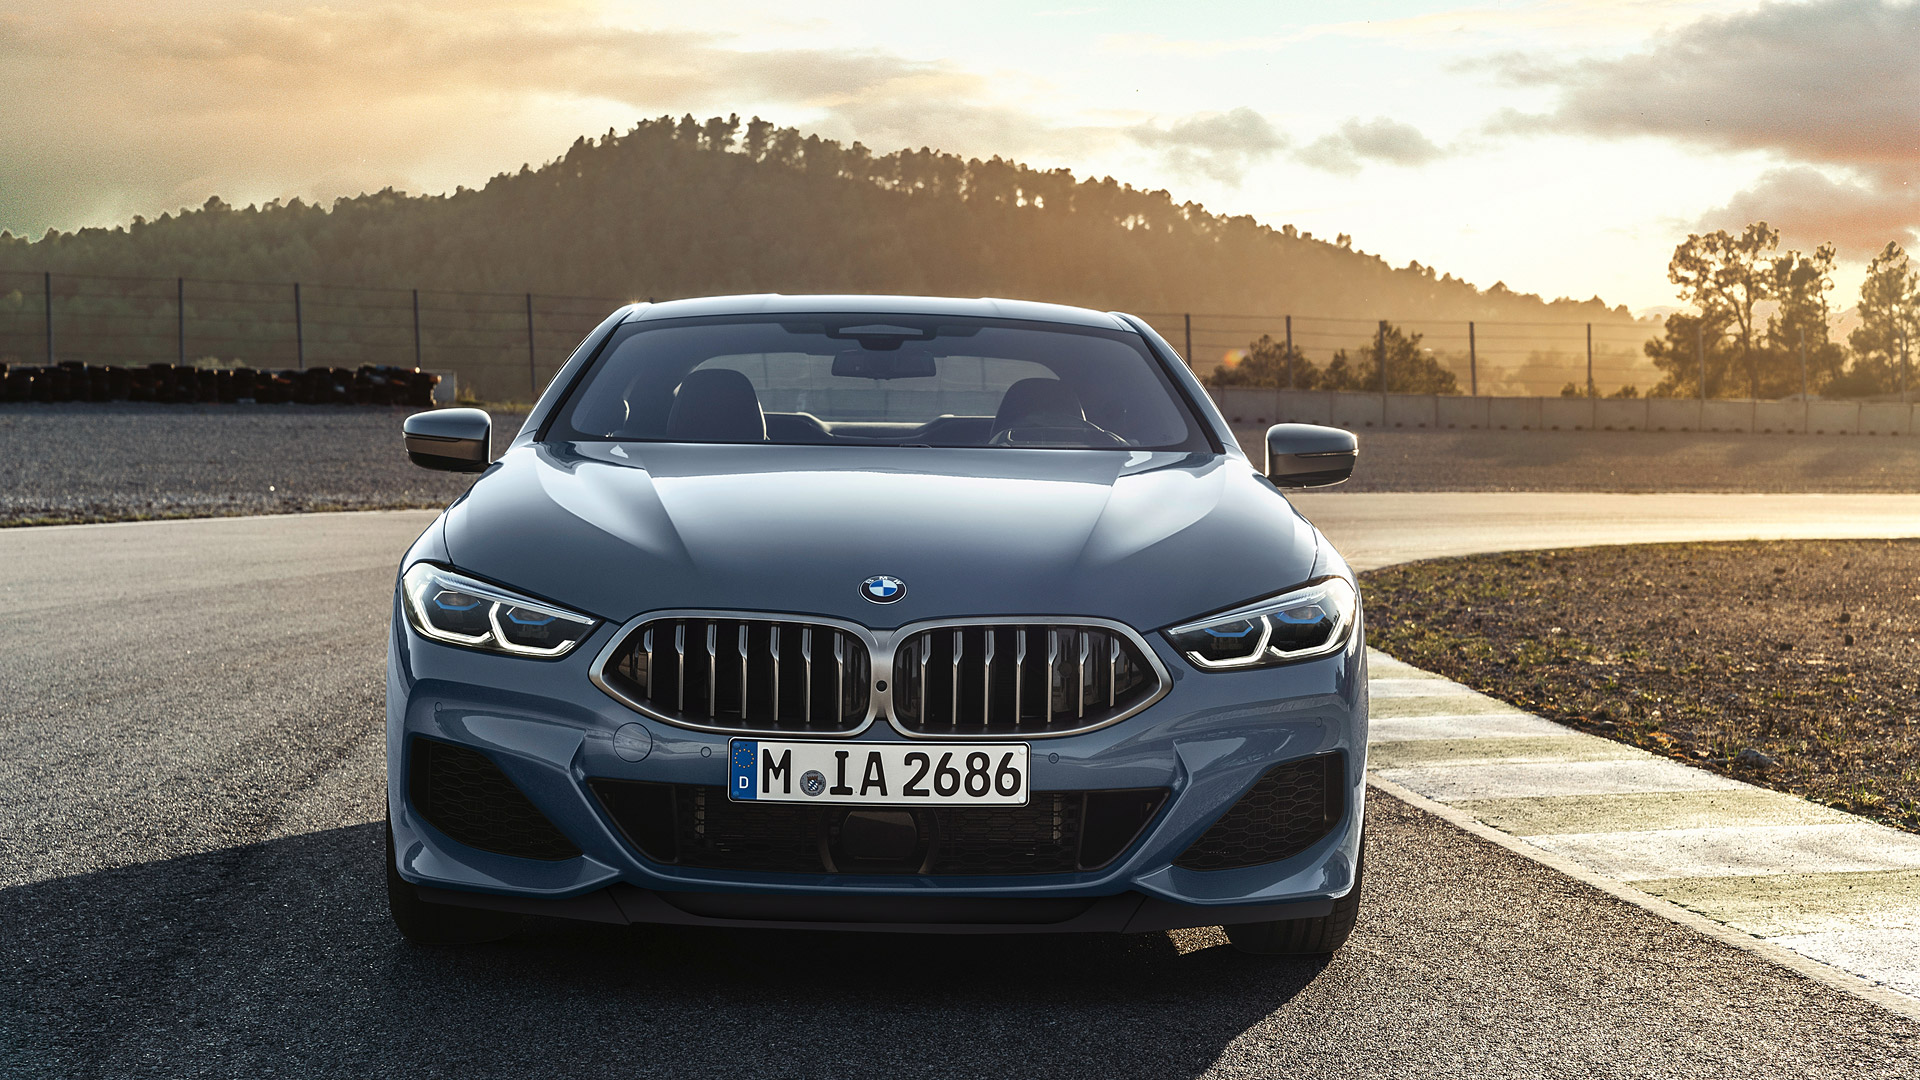 Free Download 2019 Bmw 8 Series Coupe Wallpapers Hd Images Wsupercars 1920x1080 For Your Desktop Mobile Tablet Explore 31 Bmw 8 Series Wallpapers Bmw 8 Series Wallpapers Bmw 8